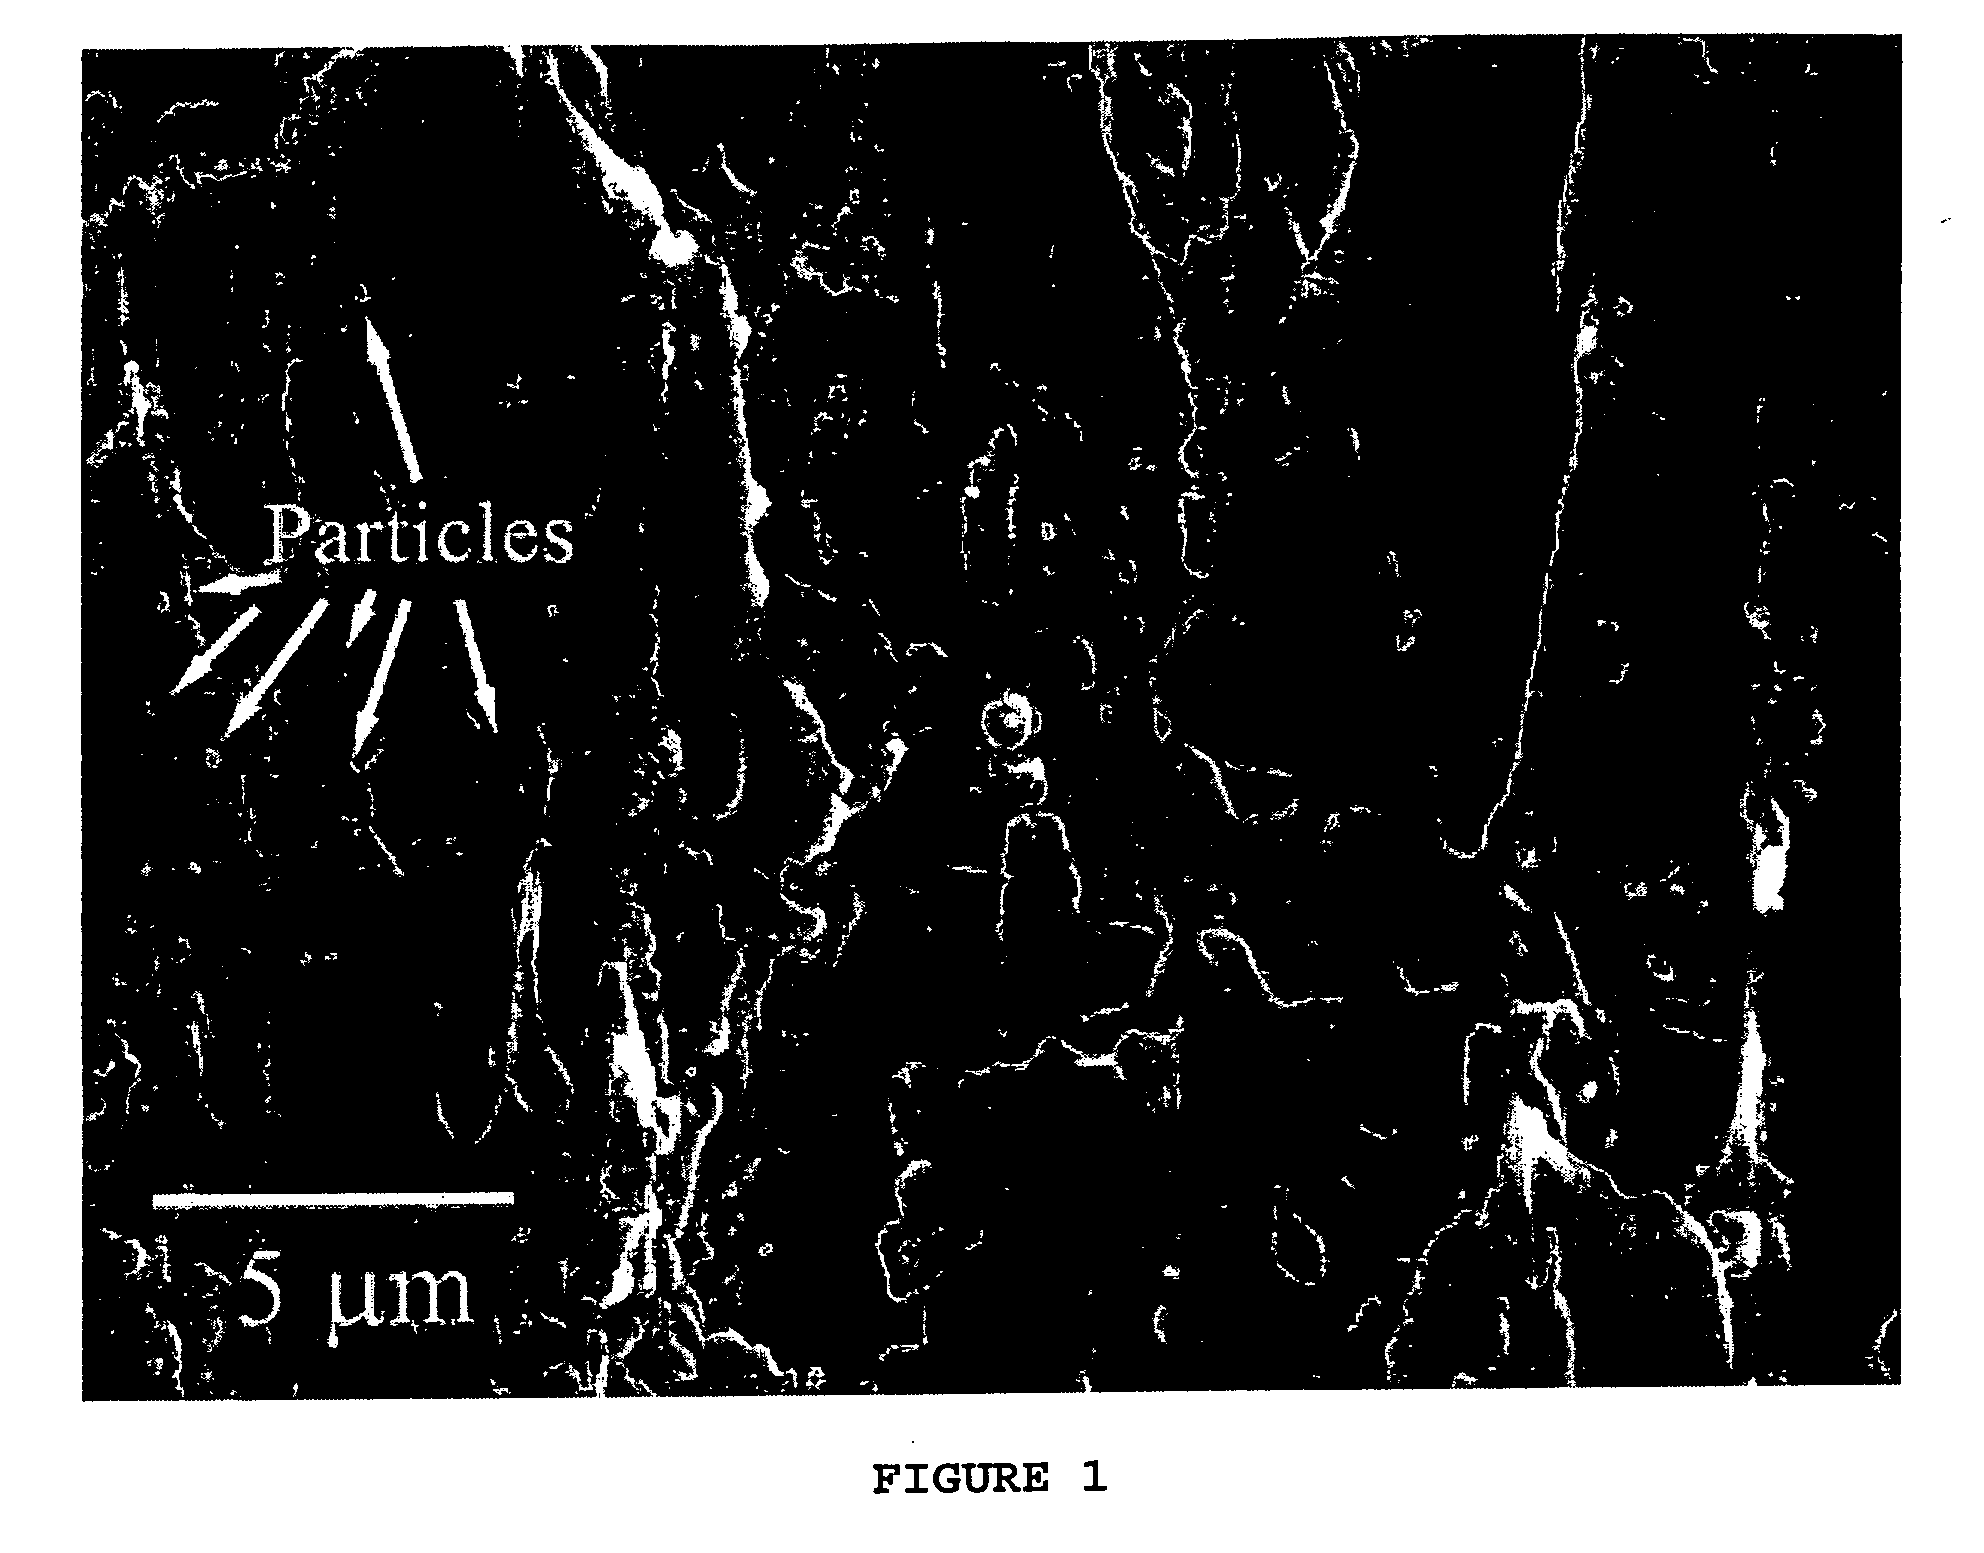 Composite metal matrix castings and solder compositions, and methods